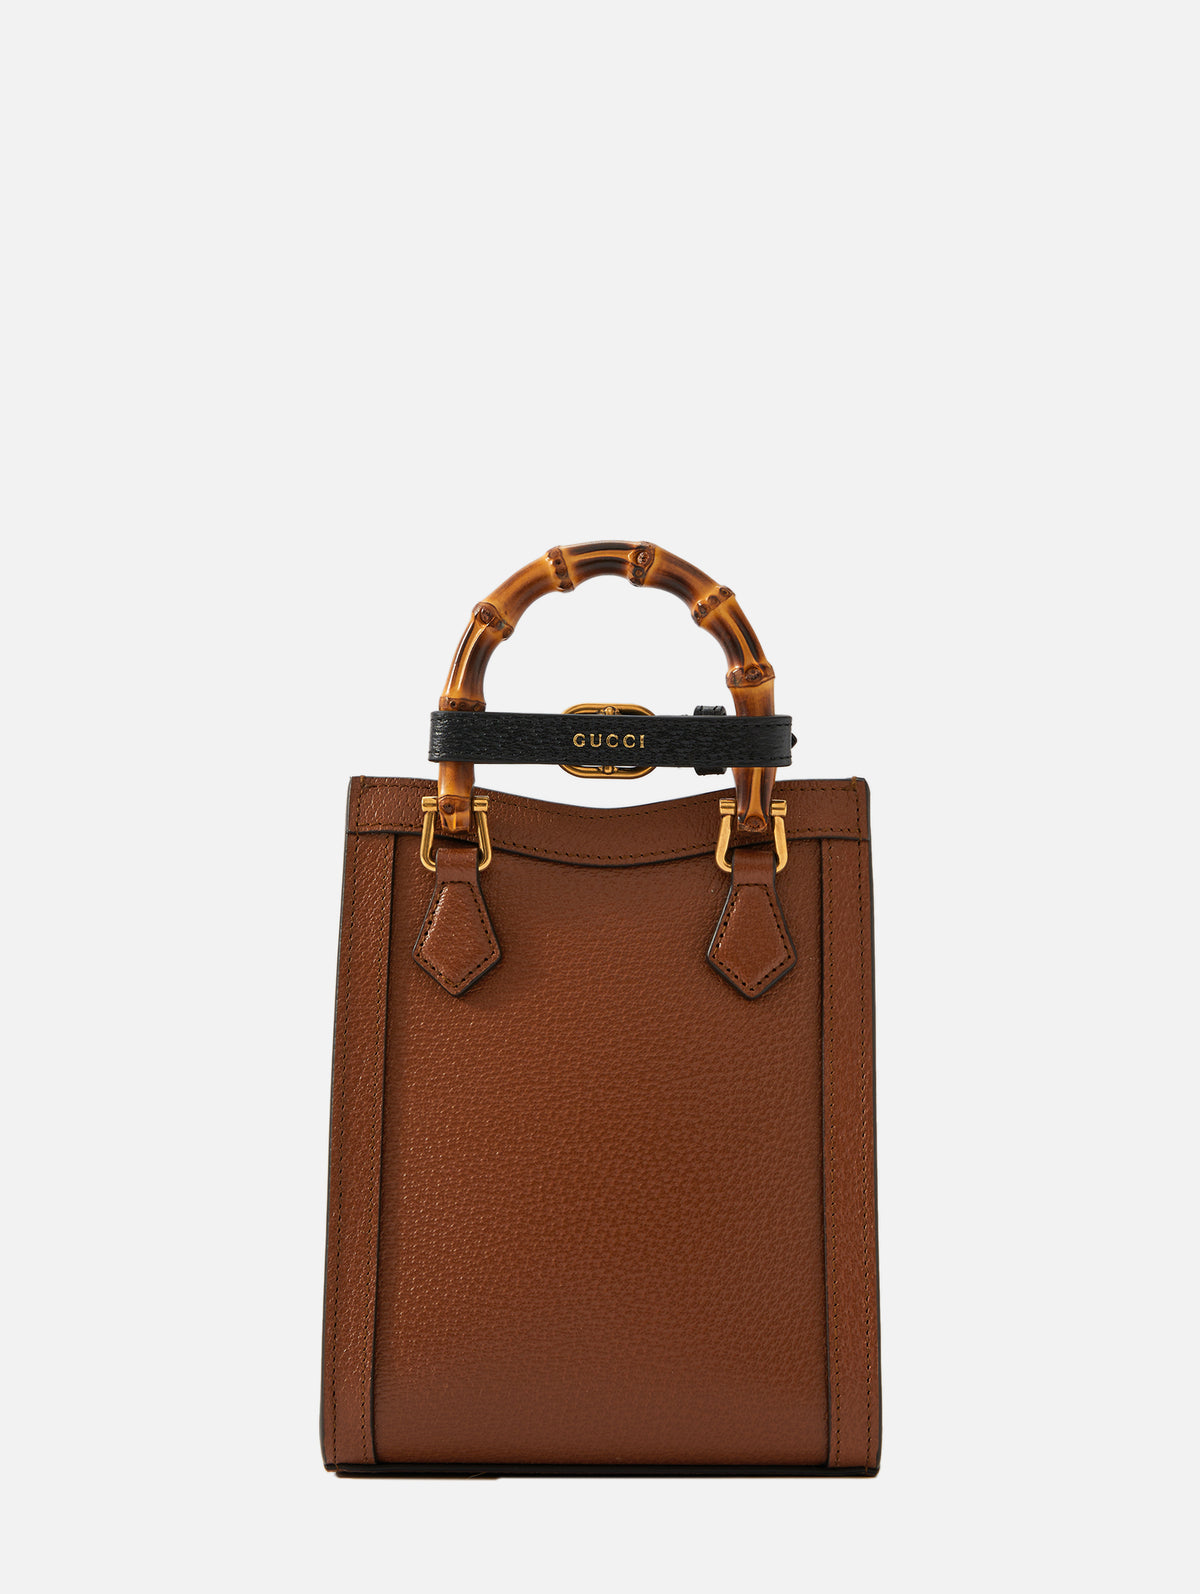 Gucci Handbags, Shop The Largest Collection